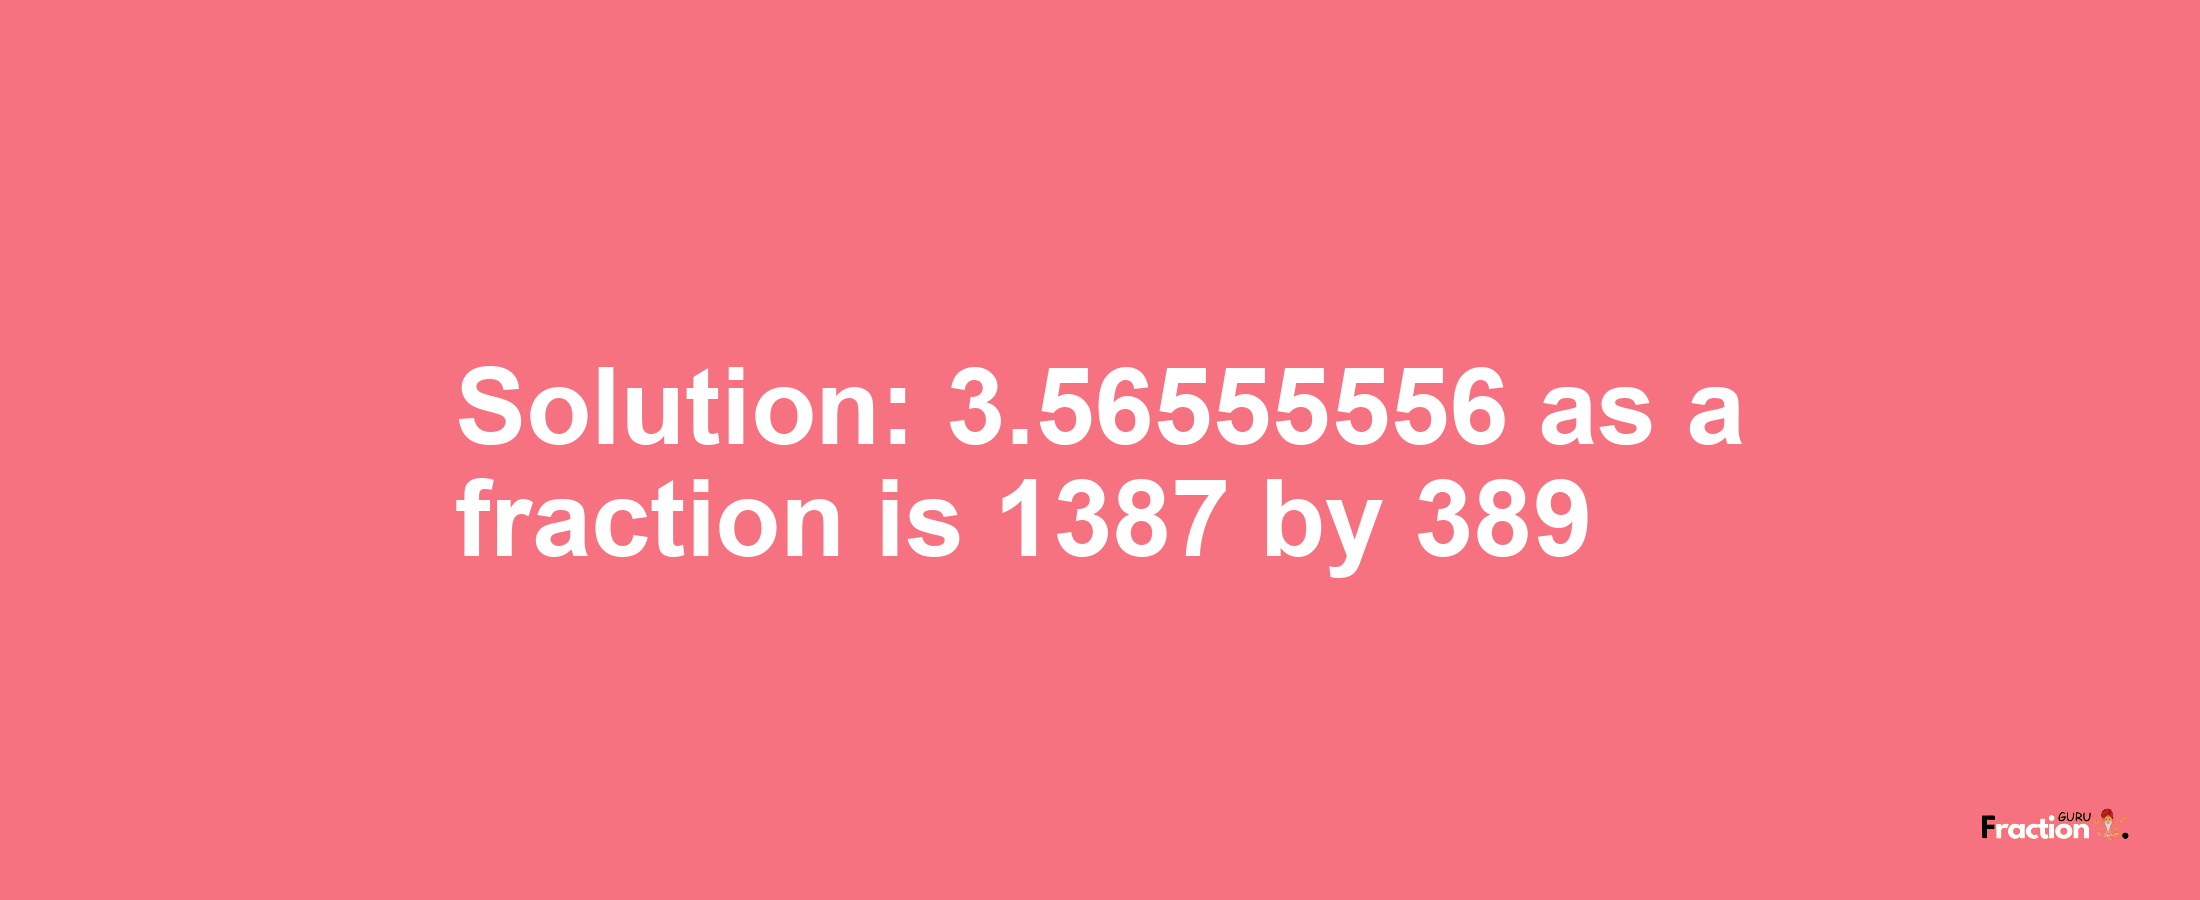 Solution:3.56555556 as a fraction is 1387/389